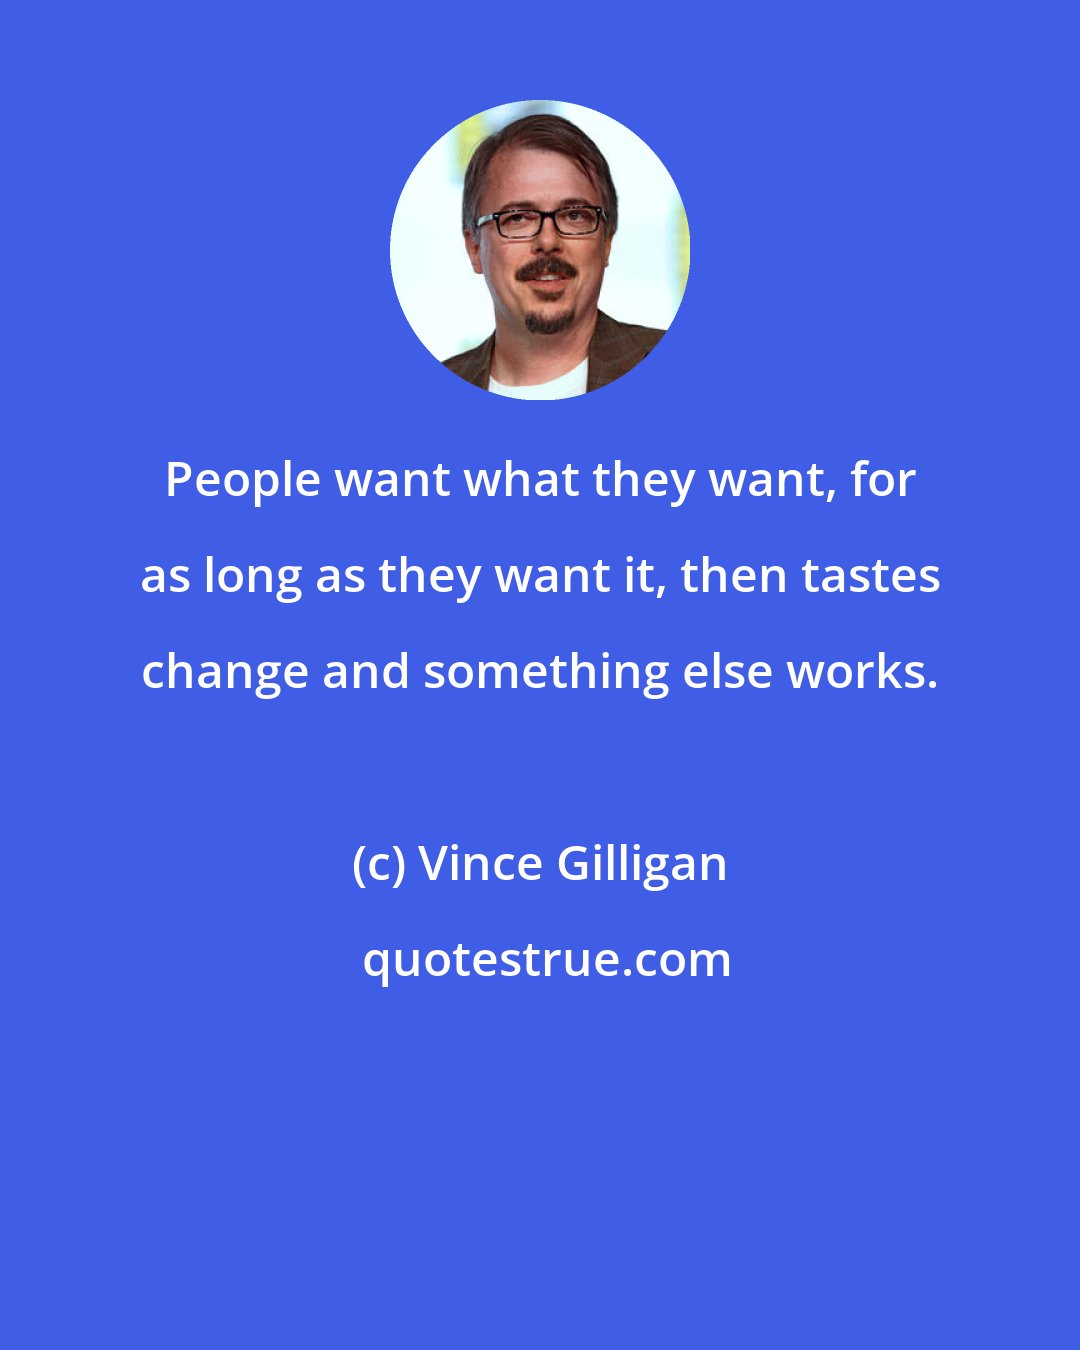 Vince Gilligan: People want what they want, for as long as they want it, then tastes change and something else works.